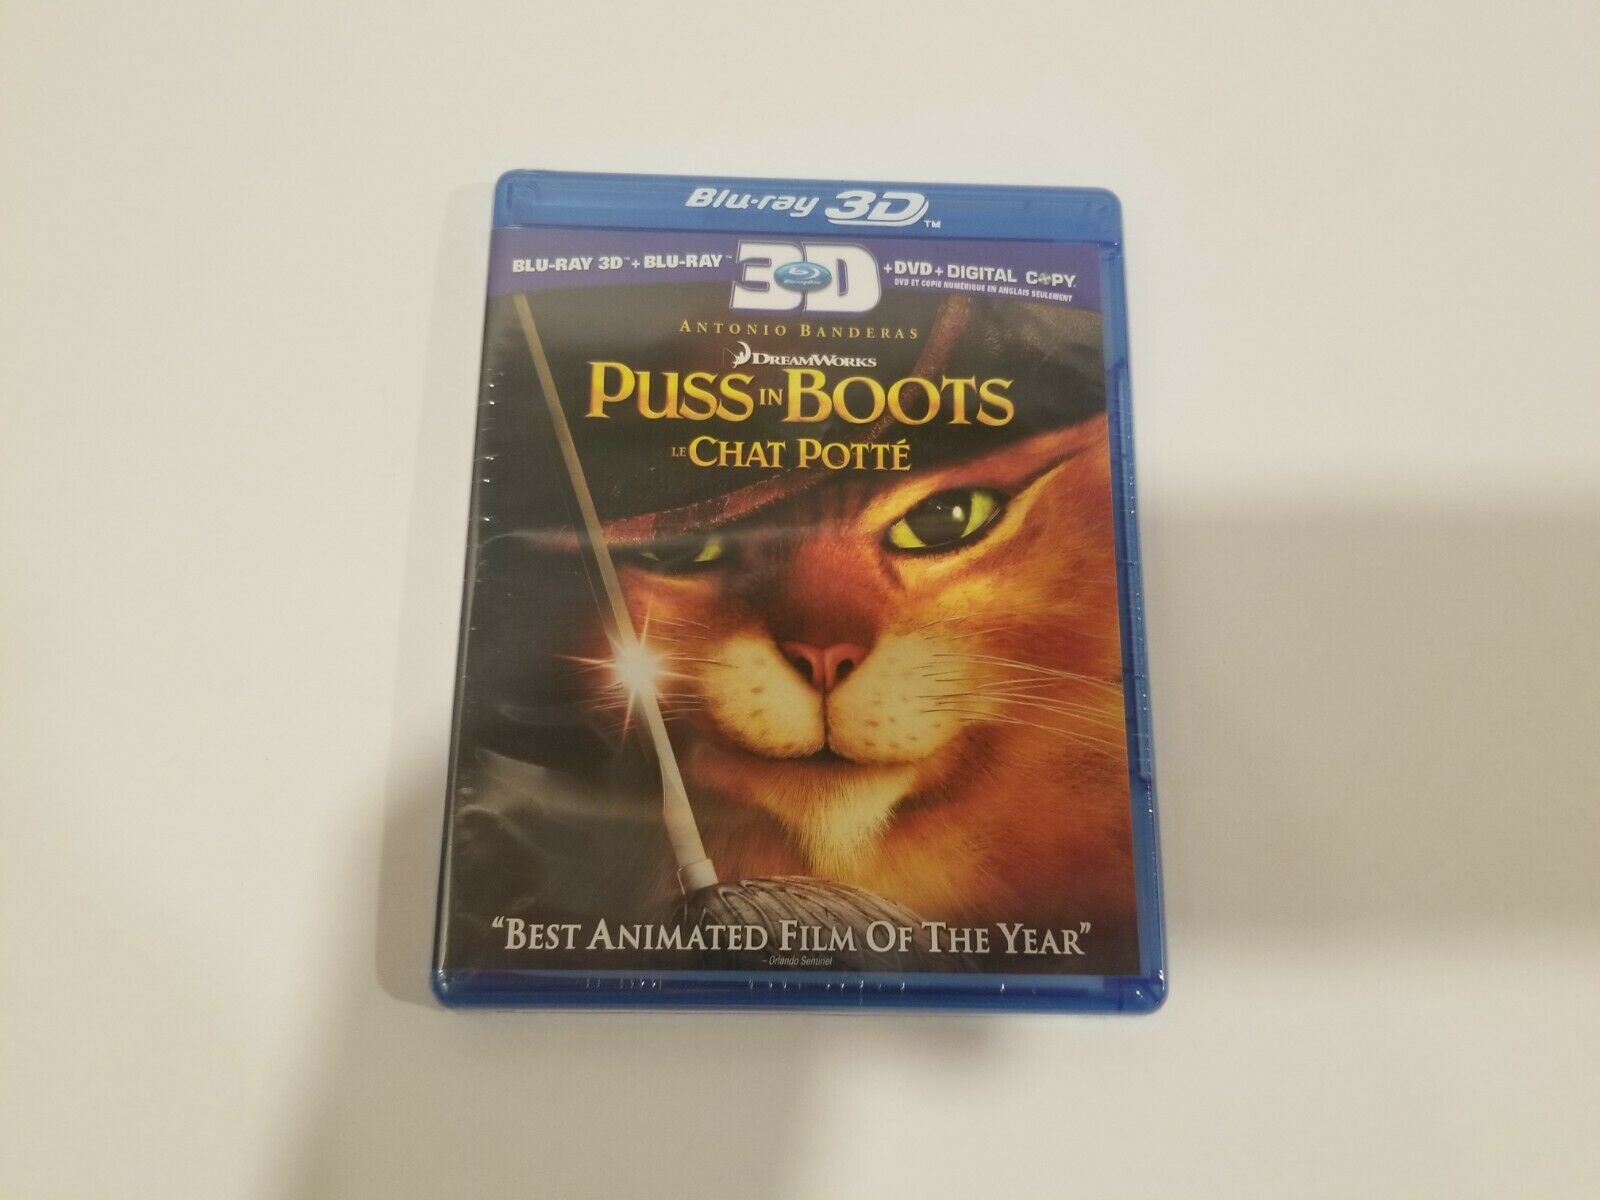 Primary image for Puss In Boots 3D (Blu-ray / DVD, 2011) New